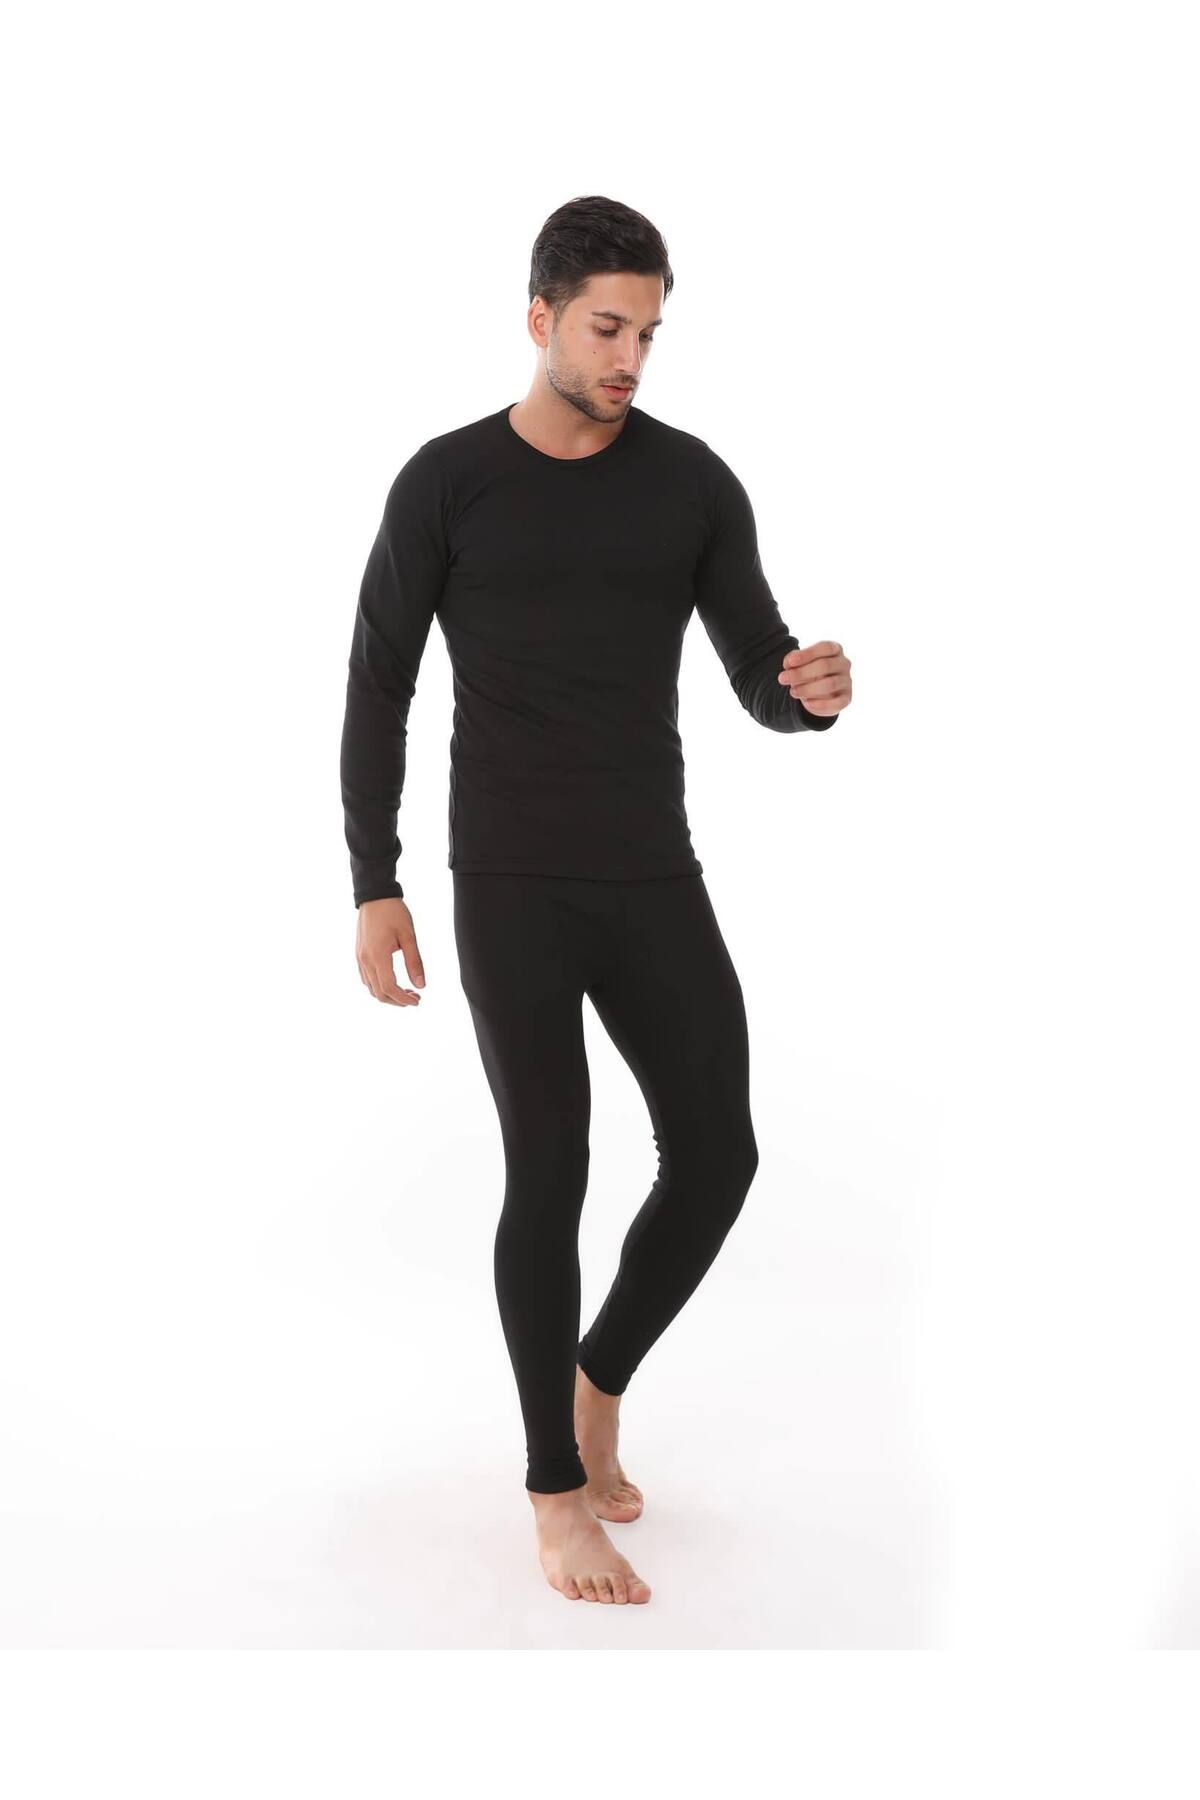 Cheap Unisex Winter Thermal Suit With Fleece Inner, Thermal Undershirt And  Thermal Tights Underwear